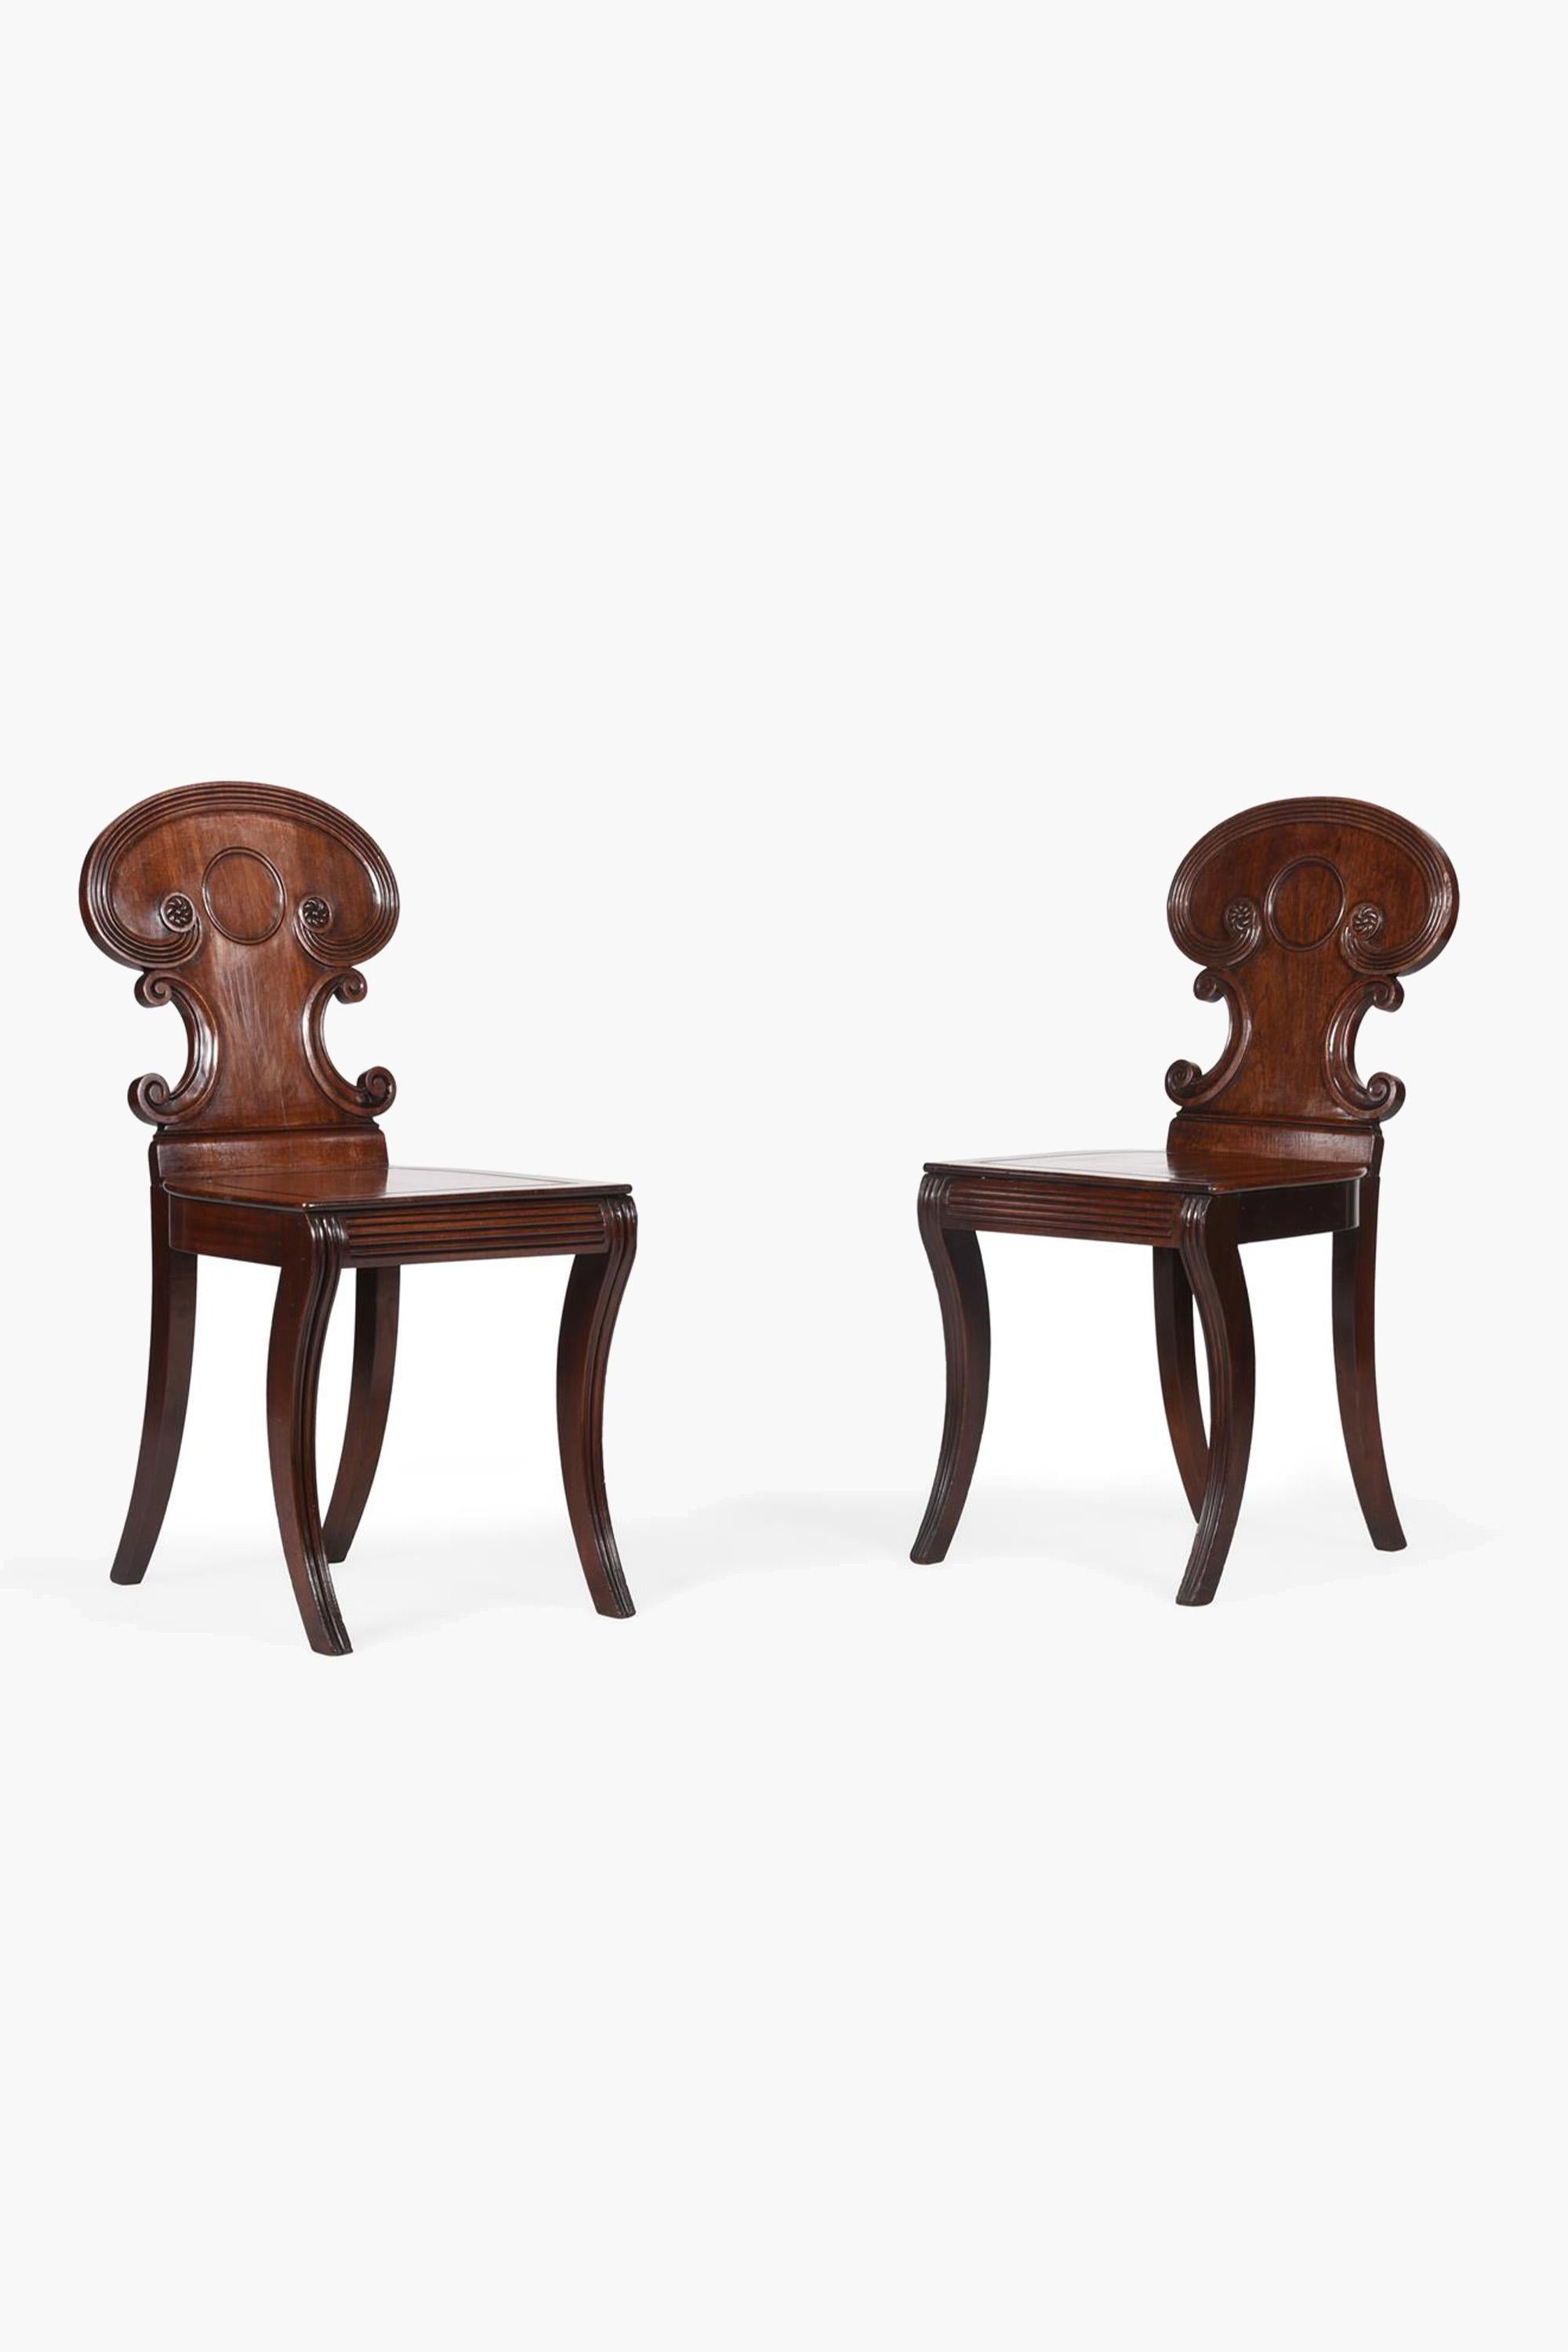 A PAIR OF REGENCY MAHOGANY HALL CHAIRS ATTRIBUTED TO GILLOWS, c. 1815

For a related mahogany hall chair see Susan E Stuart, Gillows of LANCASTER and LONDON 1730-1840, Antique Collectors' Club, 2008, p203, pl177, whilst the upper back of plate 177